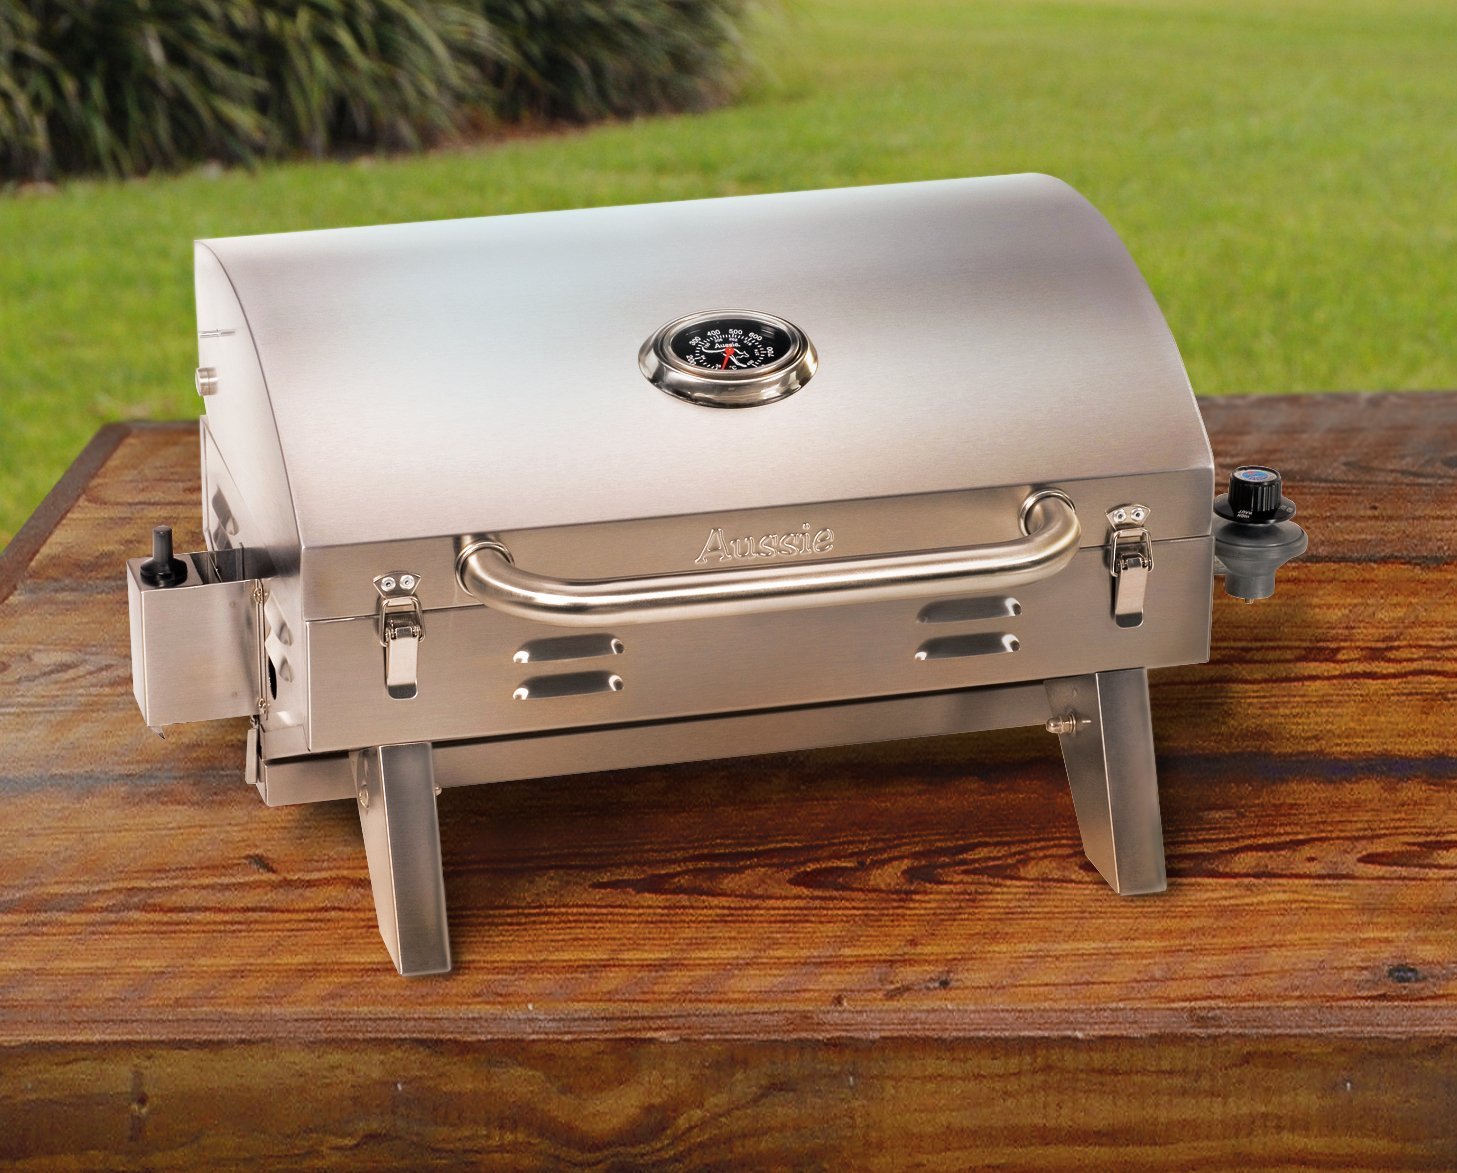 Aussie 205 Stainless Steel Tabletop Gas Grill